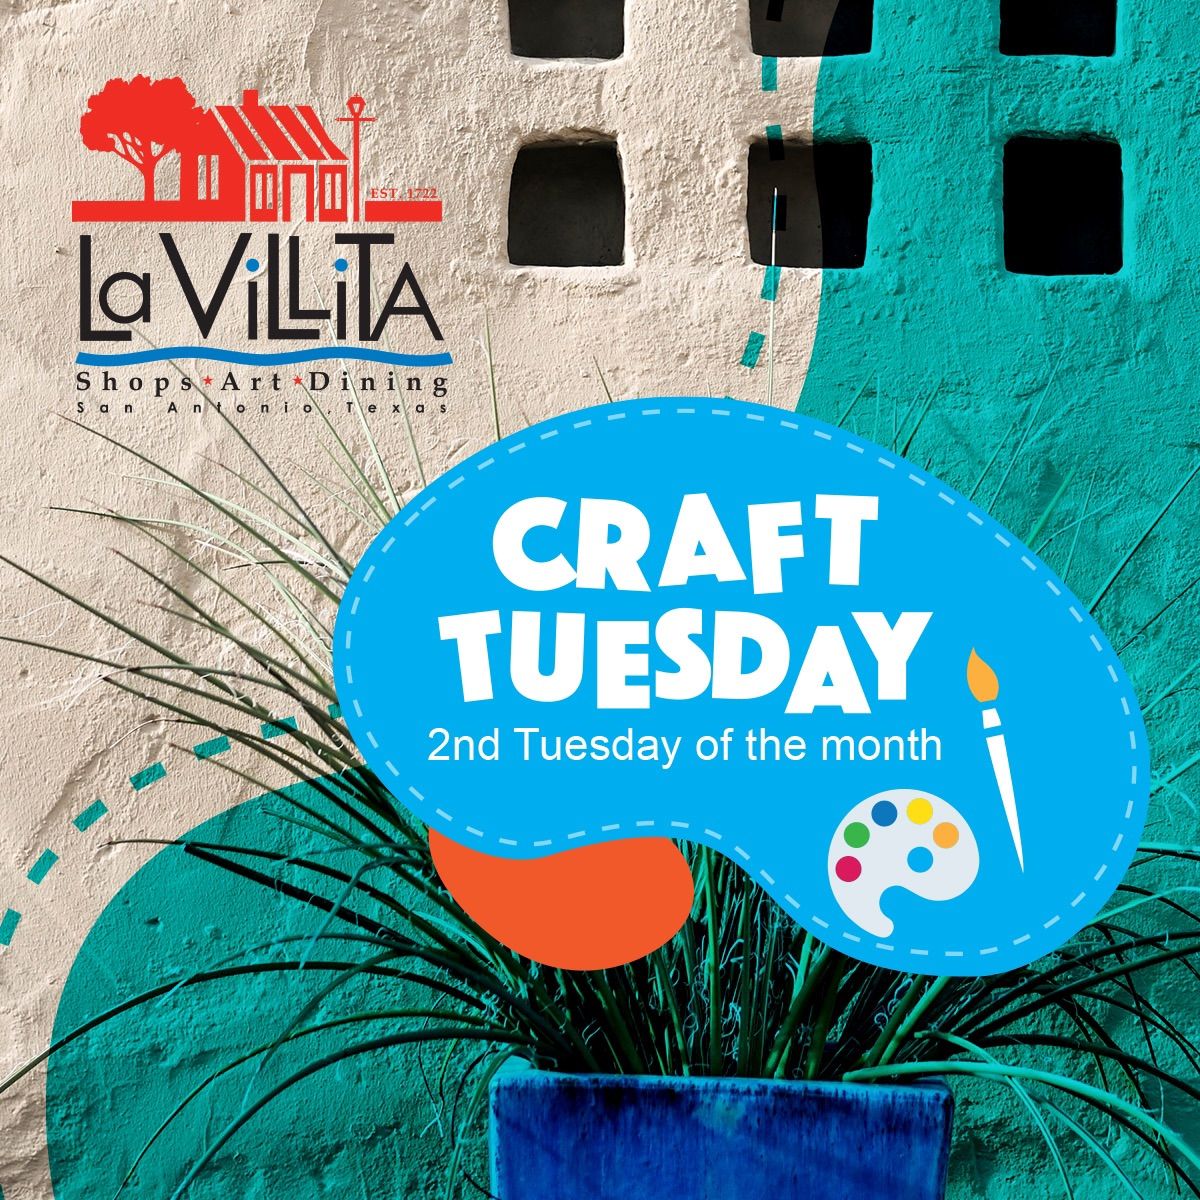 Craft Tuesday - Painting in the Plaza